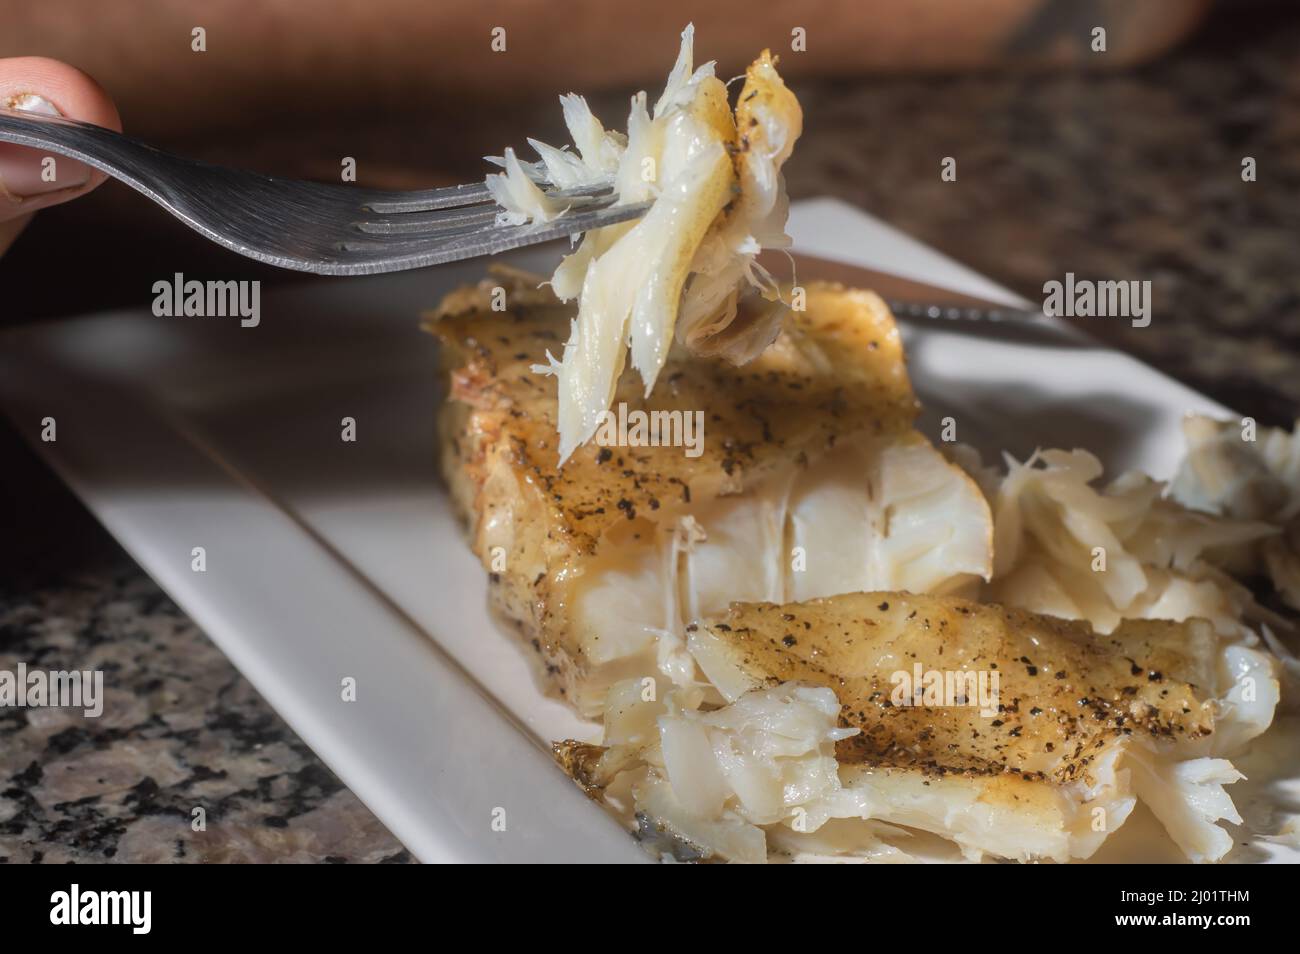 Fish sliced and roasted cod, on a white dish with copy space and dark background. Stock Photo